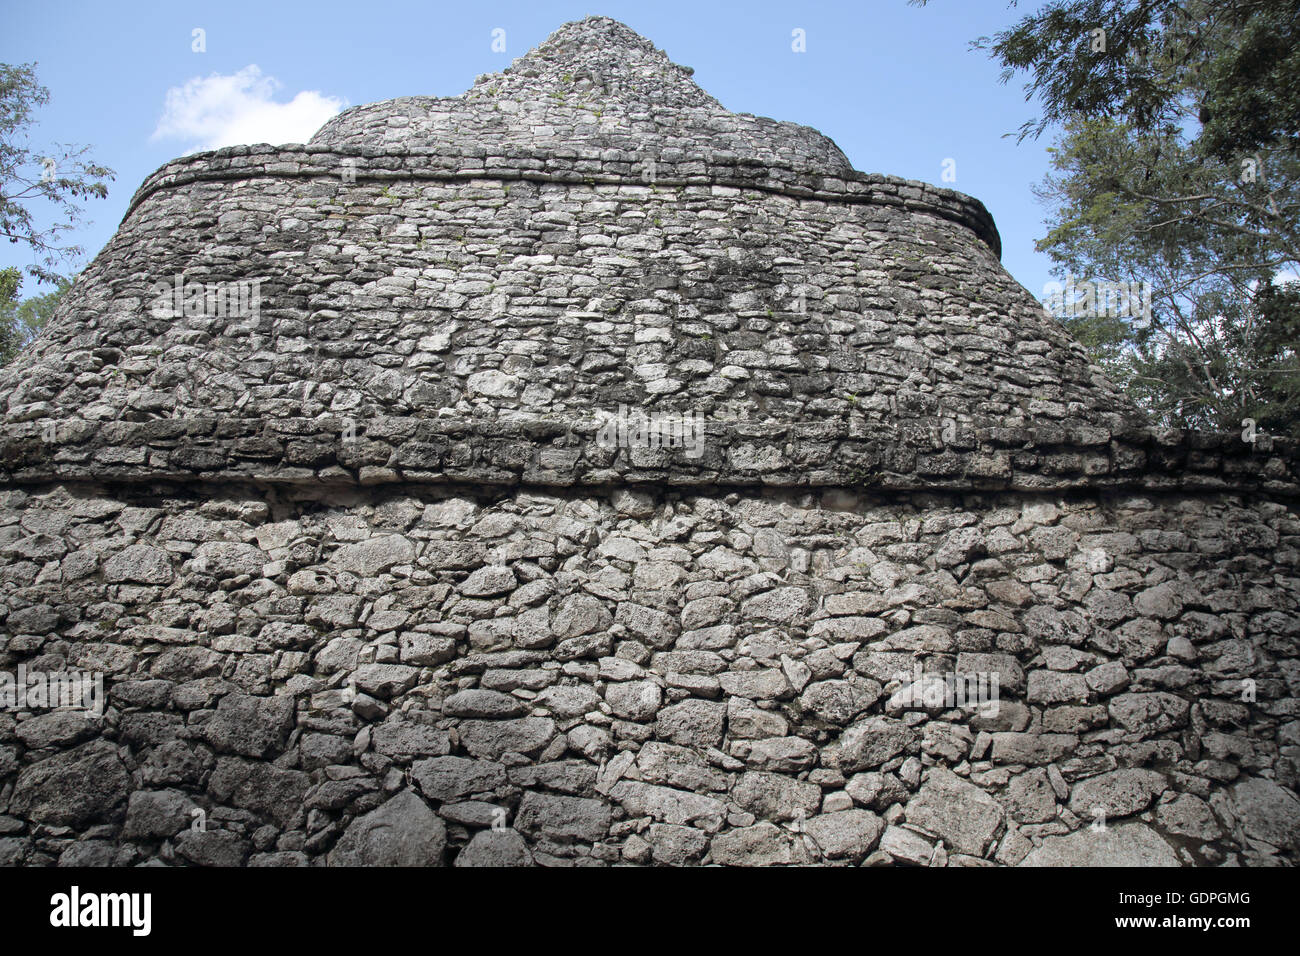 the ancient mayan archaeological site at coba mexico Stock Photo